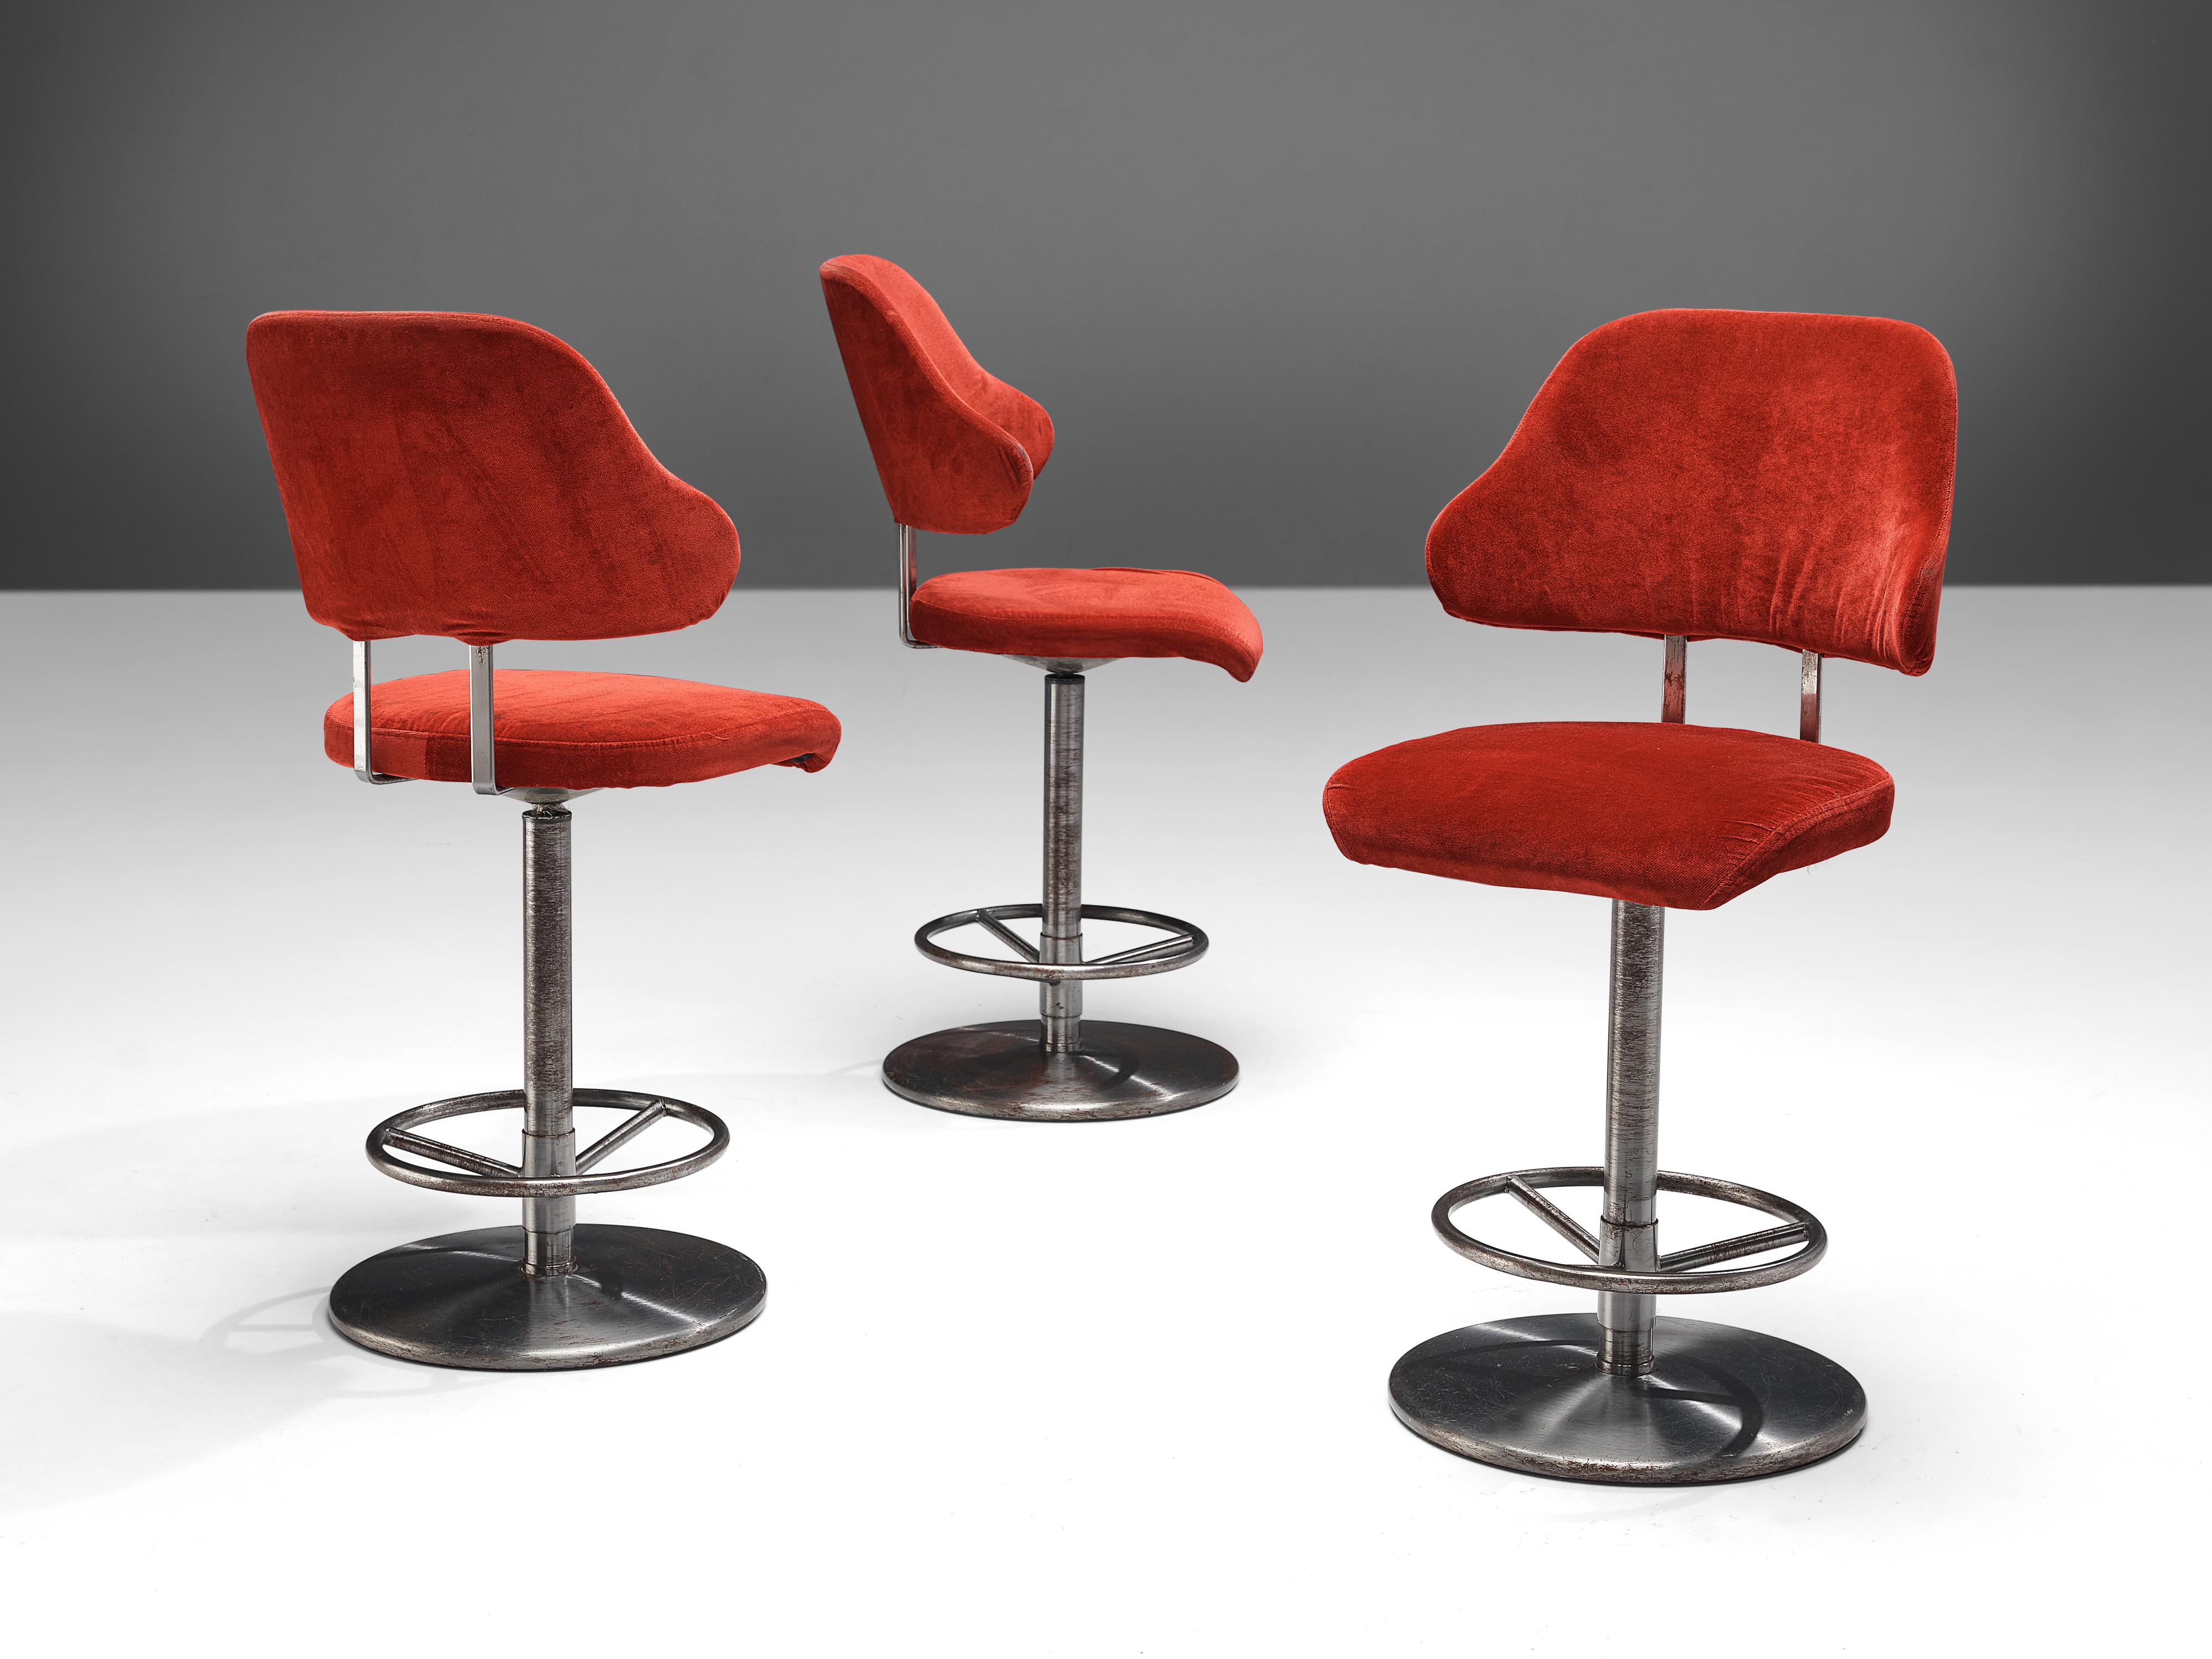 Barstools, metal, upholstery, Europe, 1970s

This set of barstools is currently upholstered in eye-catching red velvet. A comfortable seat and curved backrest have an inviting look. The round base includes a footrest.

Please note that we advise